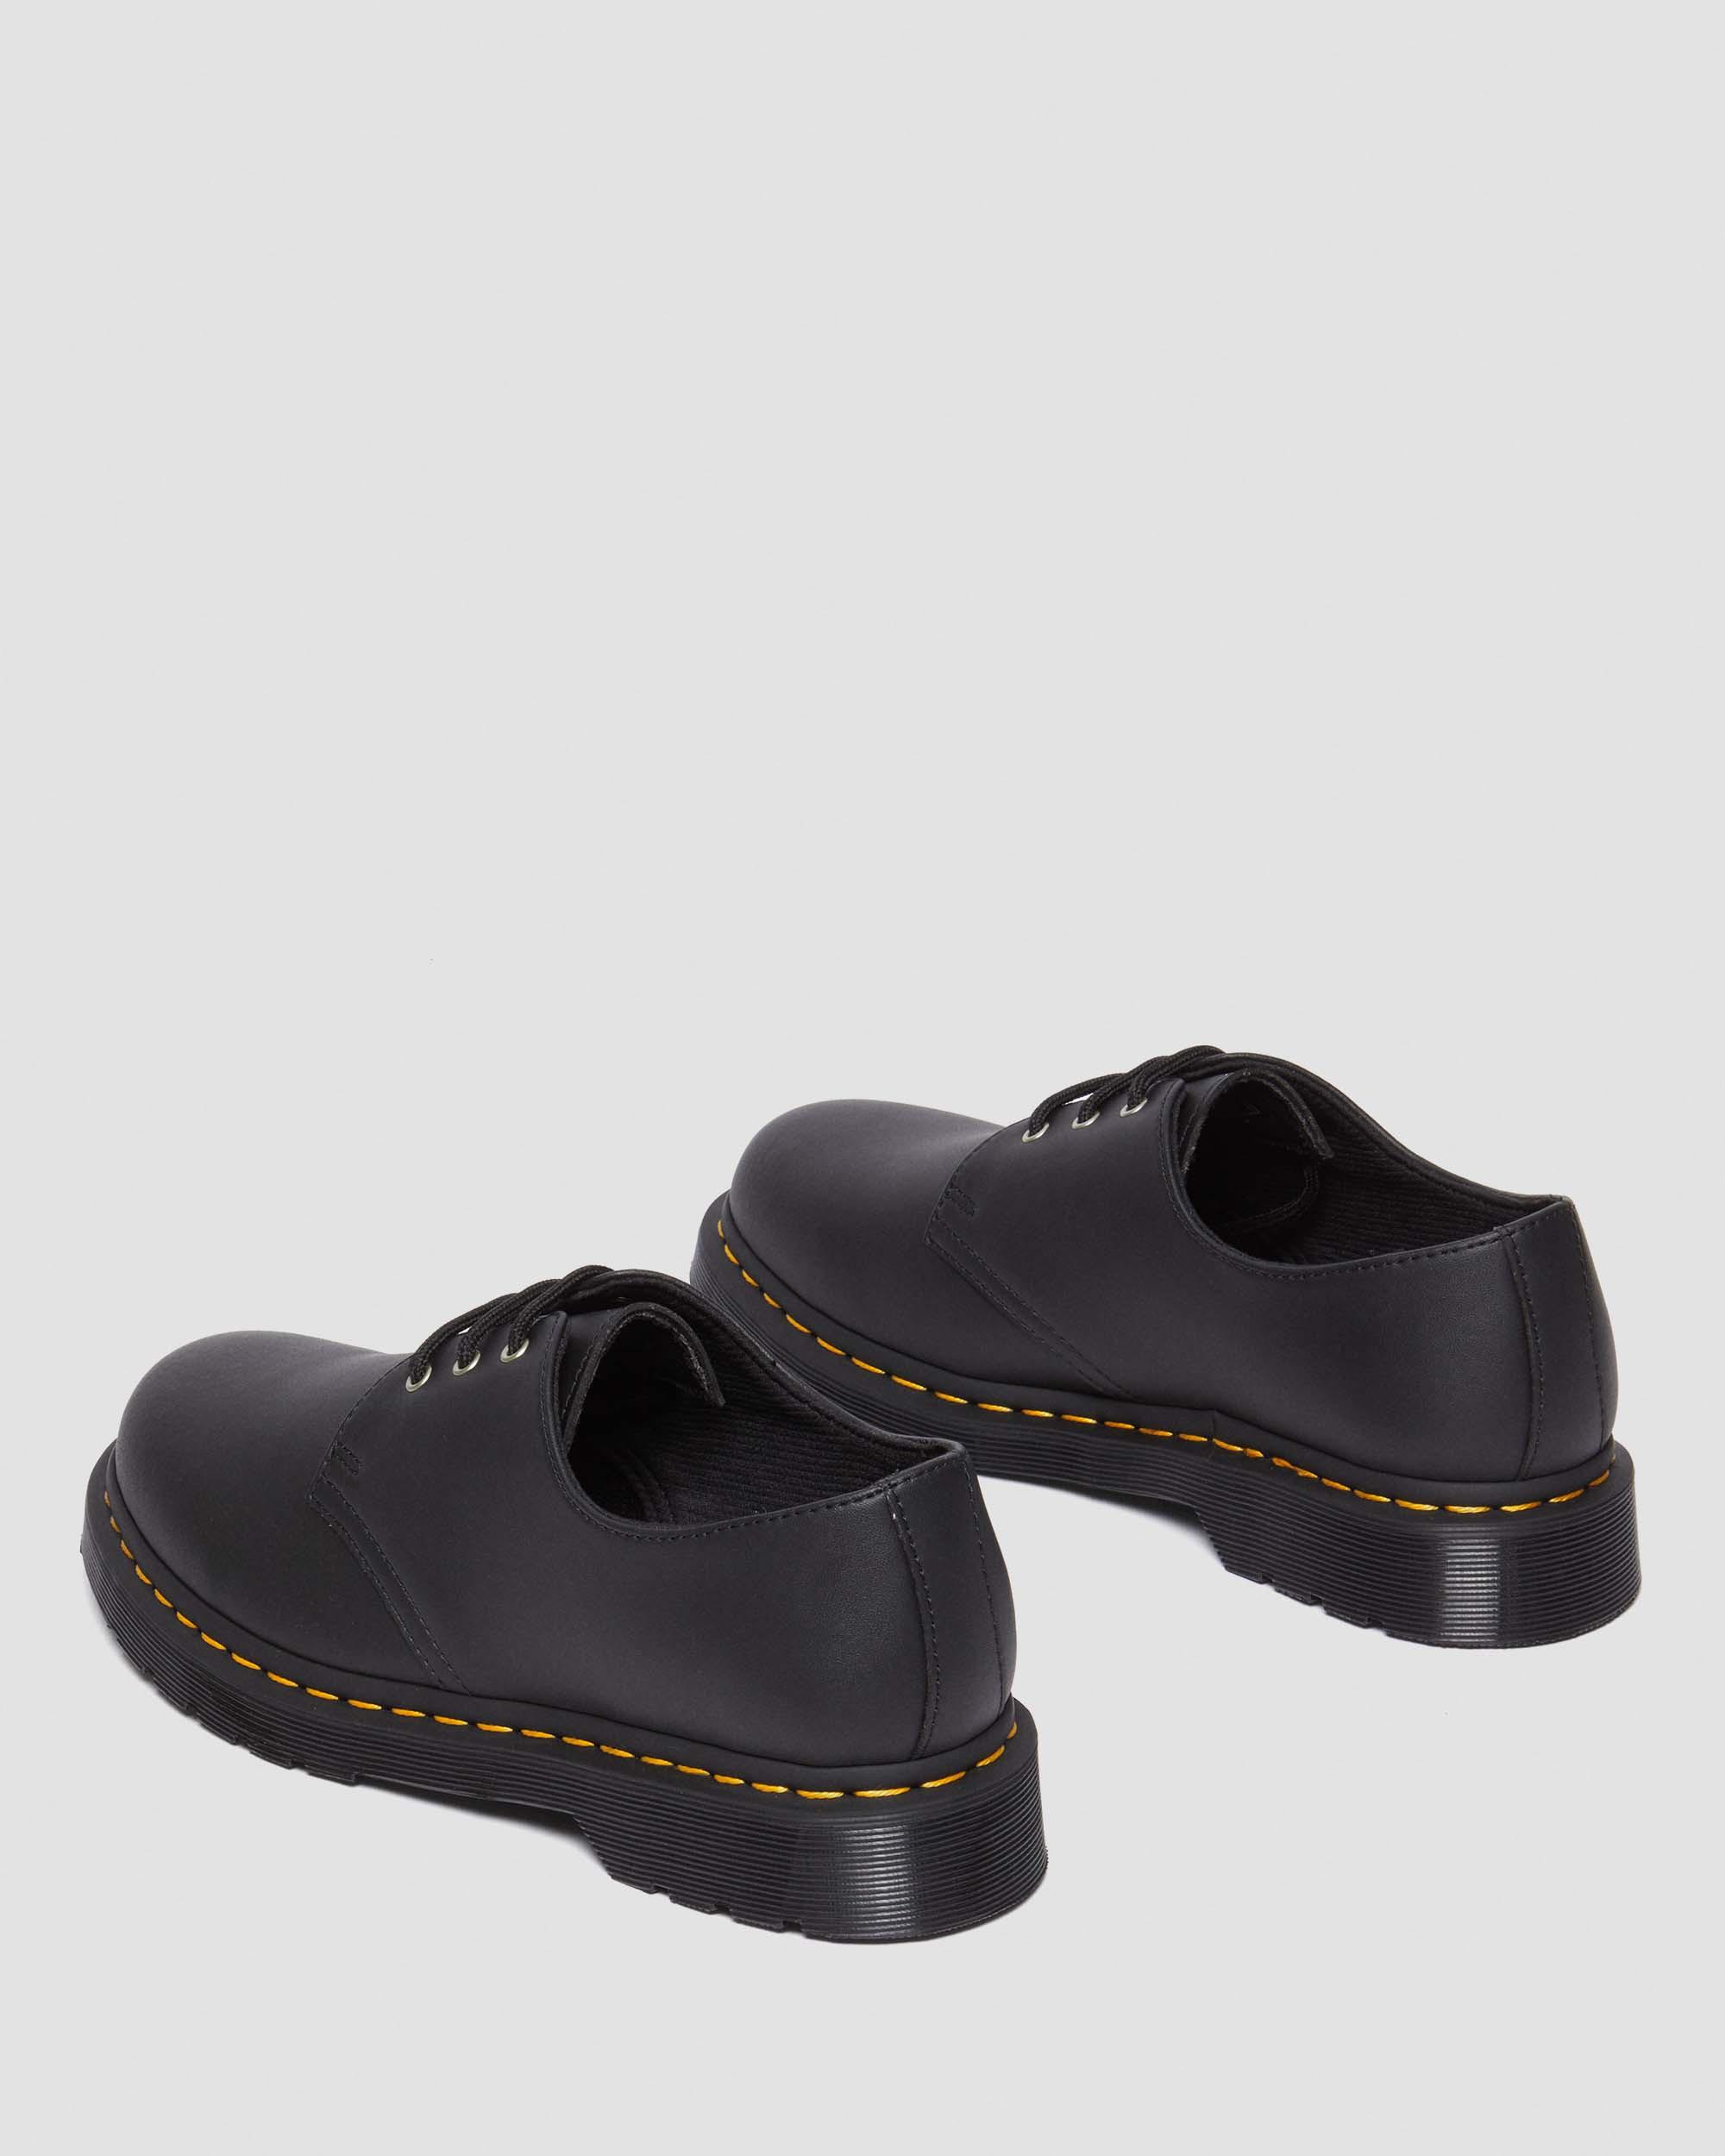 1461 Reclaimed Leather Oxford Shoes in Black